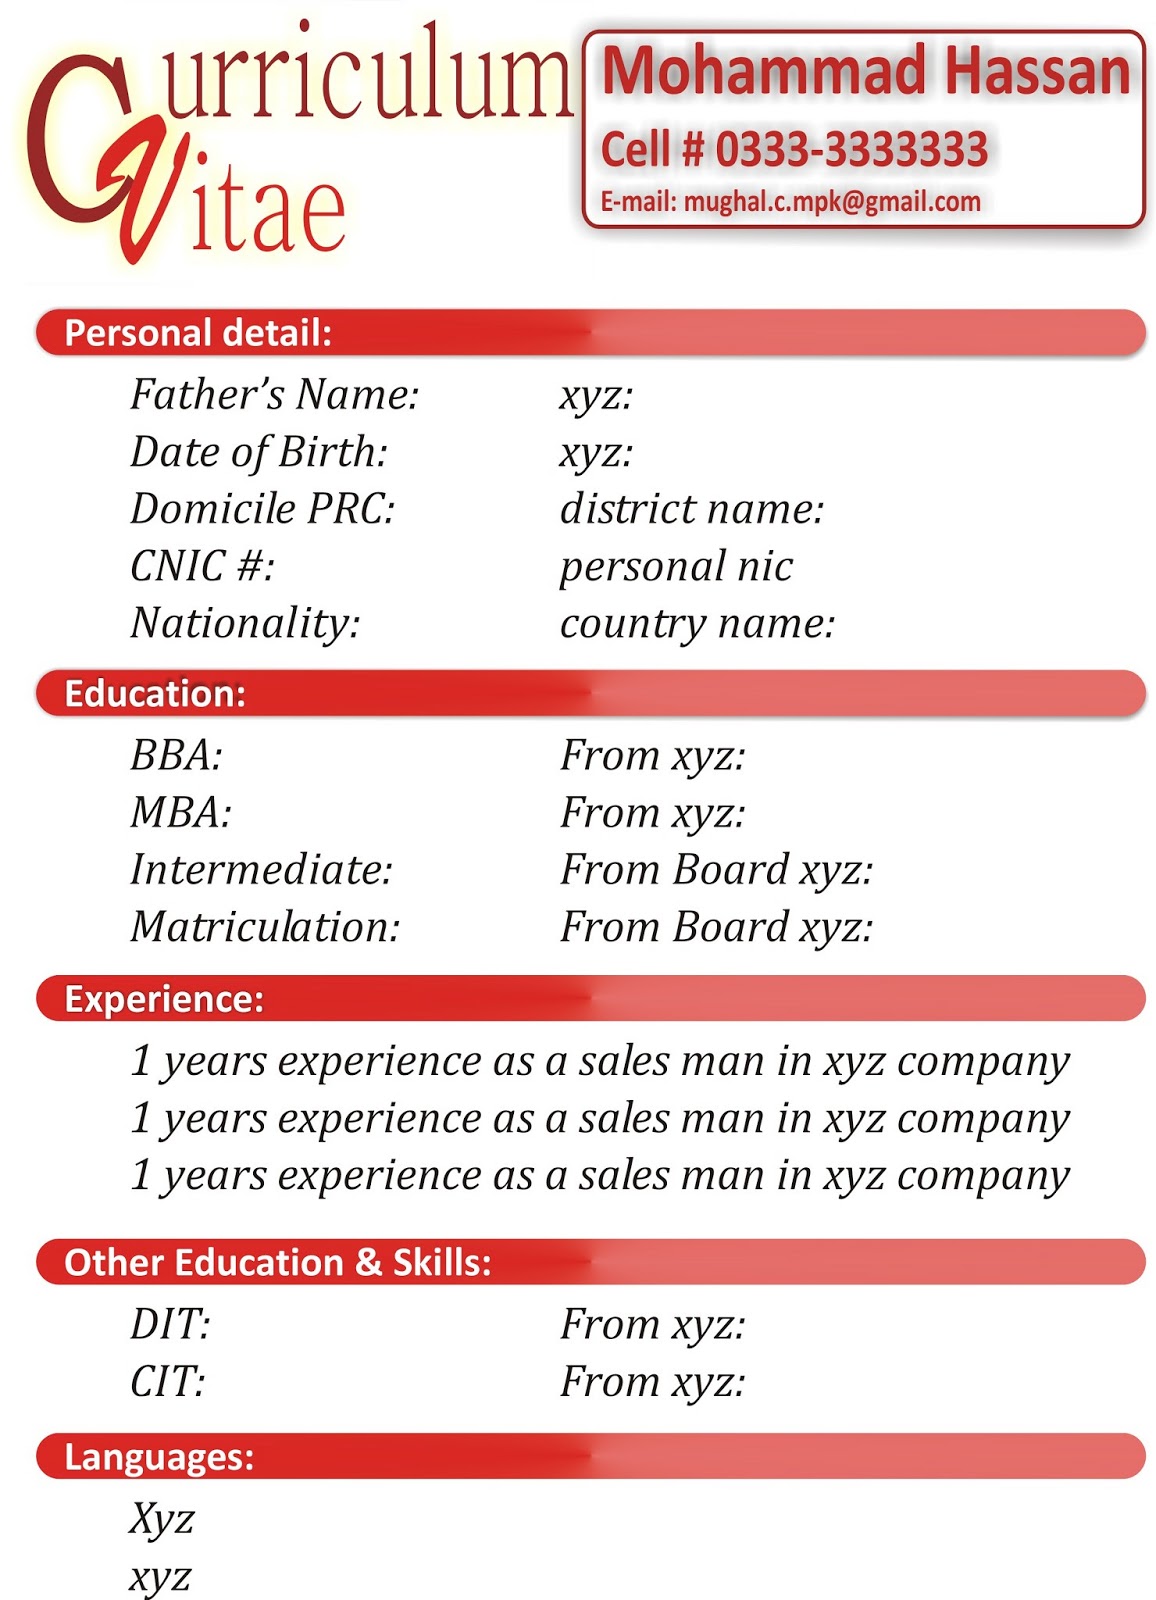 Pattern of a simple resume